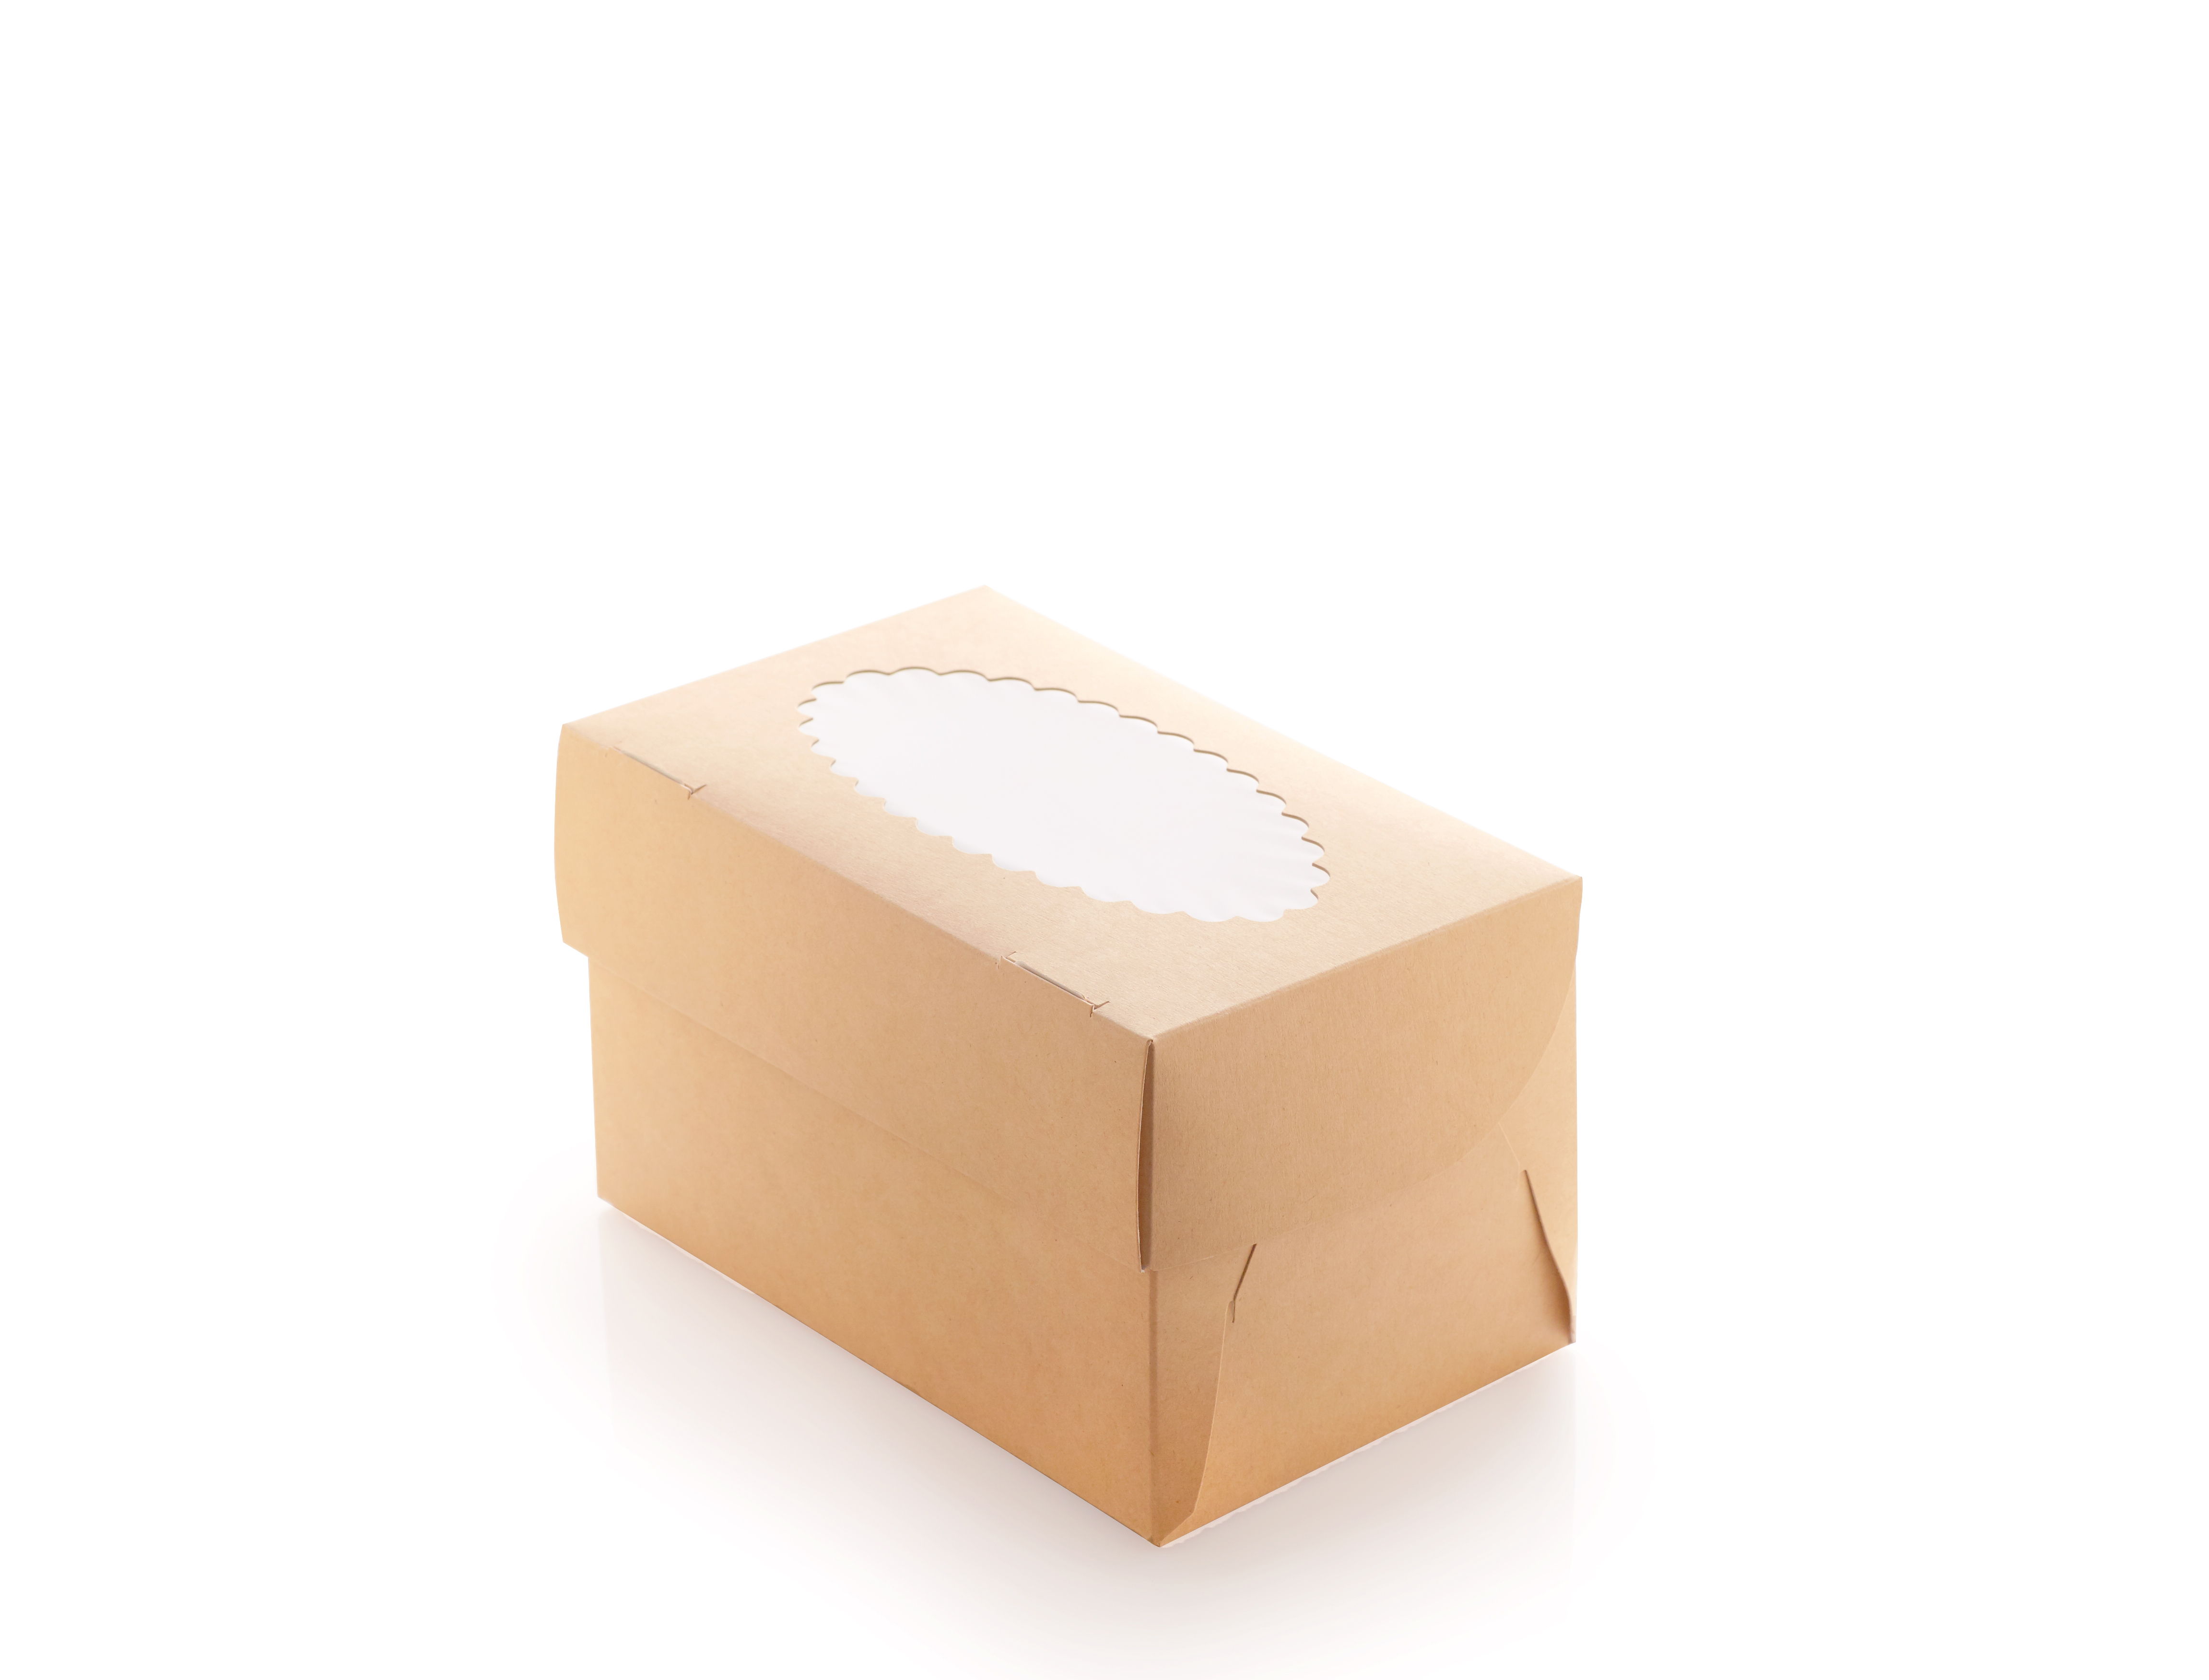 OSQ MUF 1 boxes for muffins